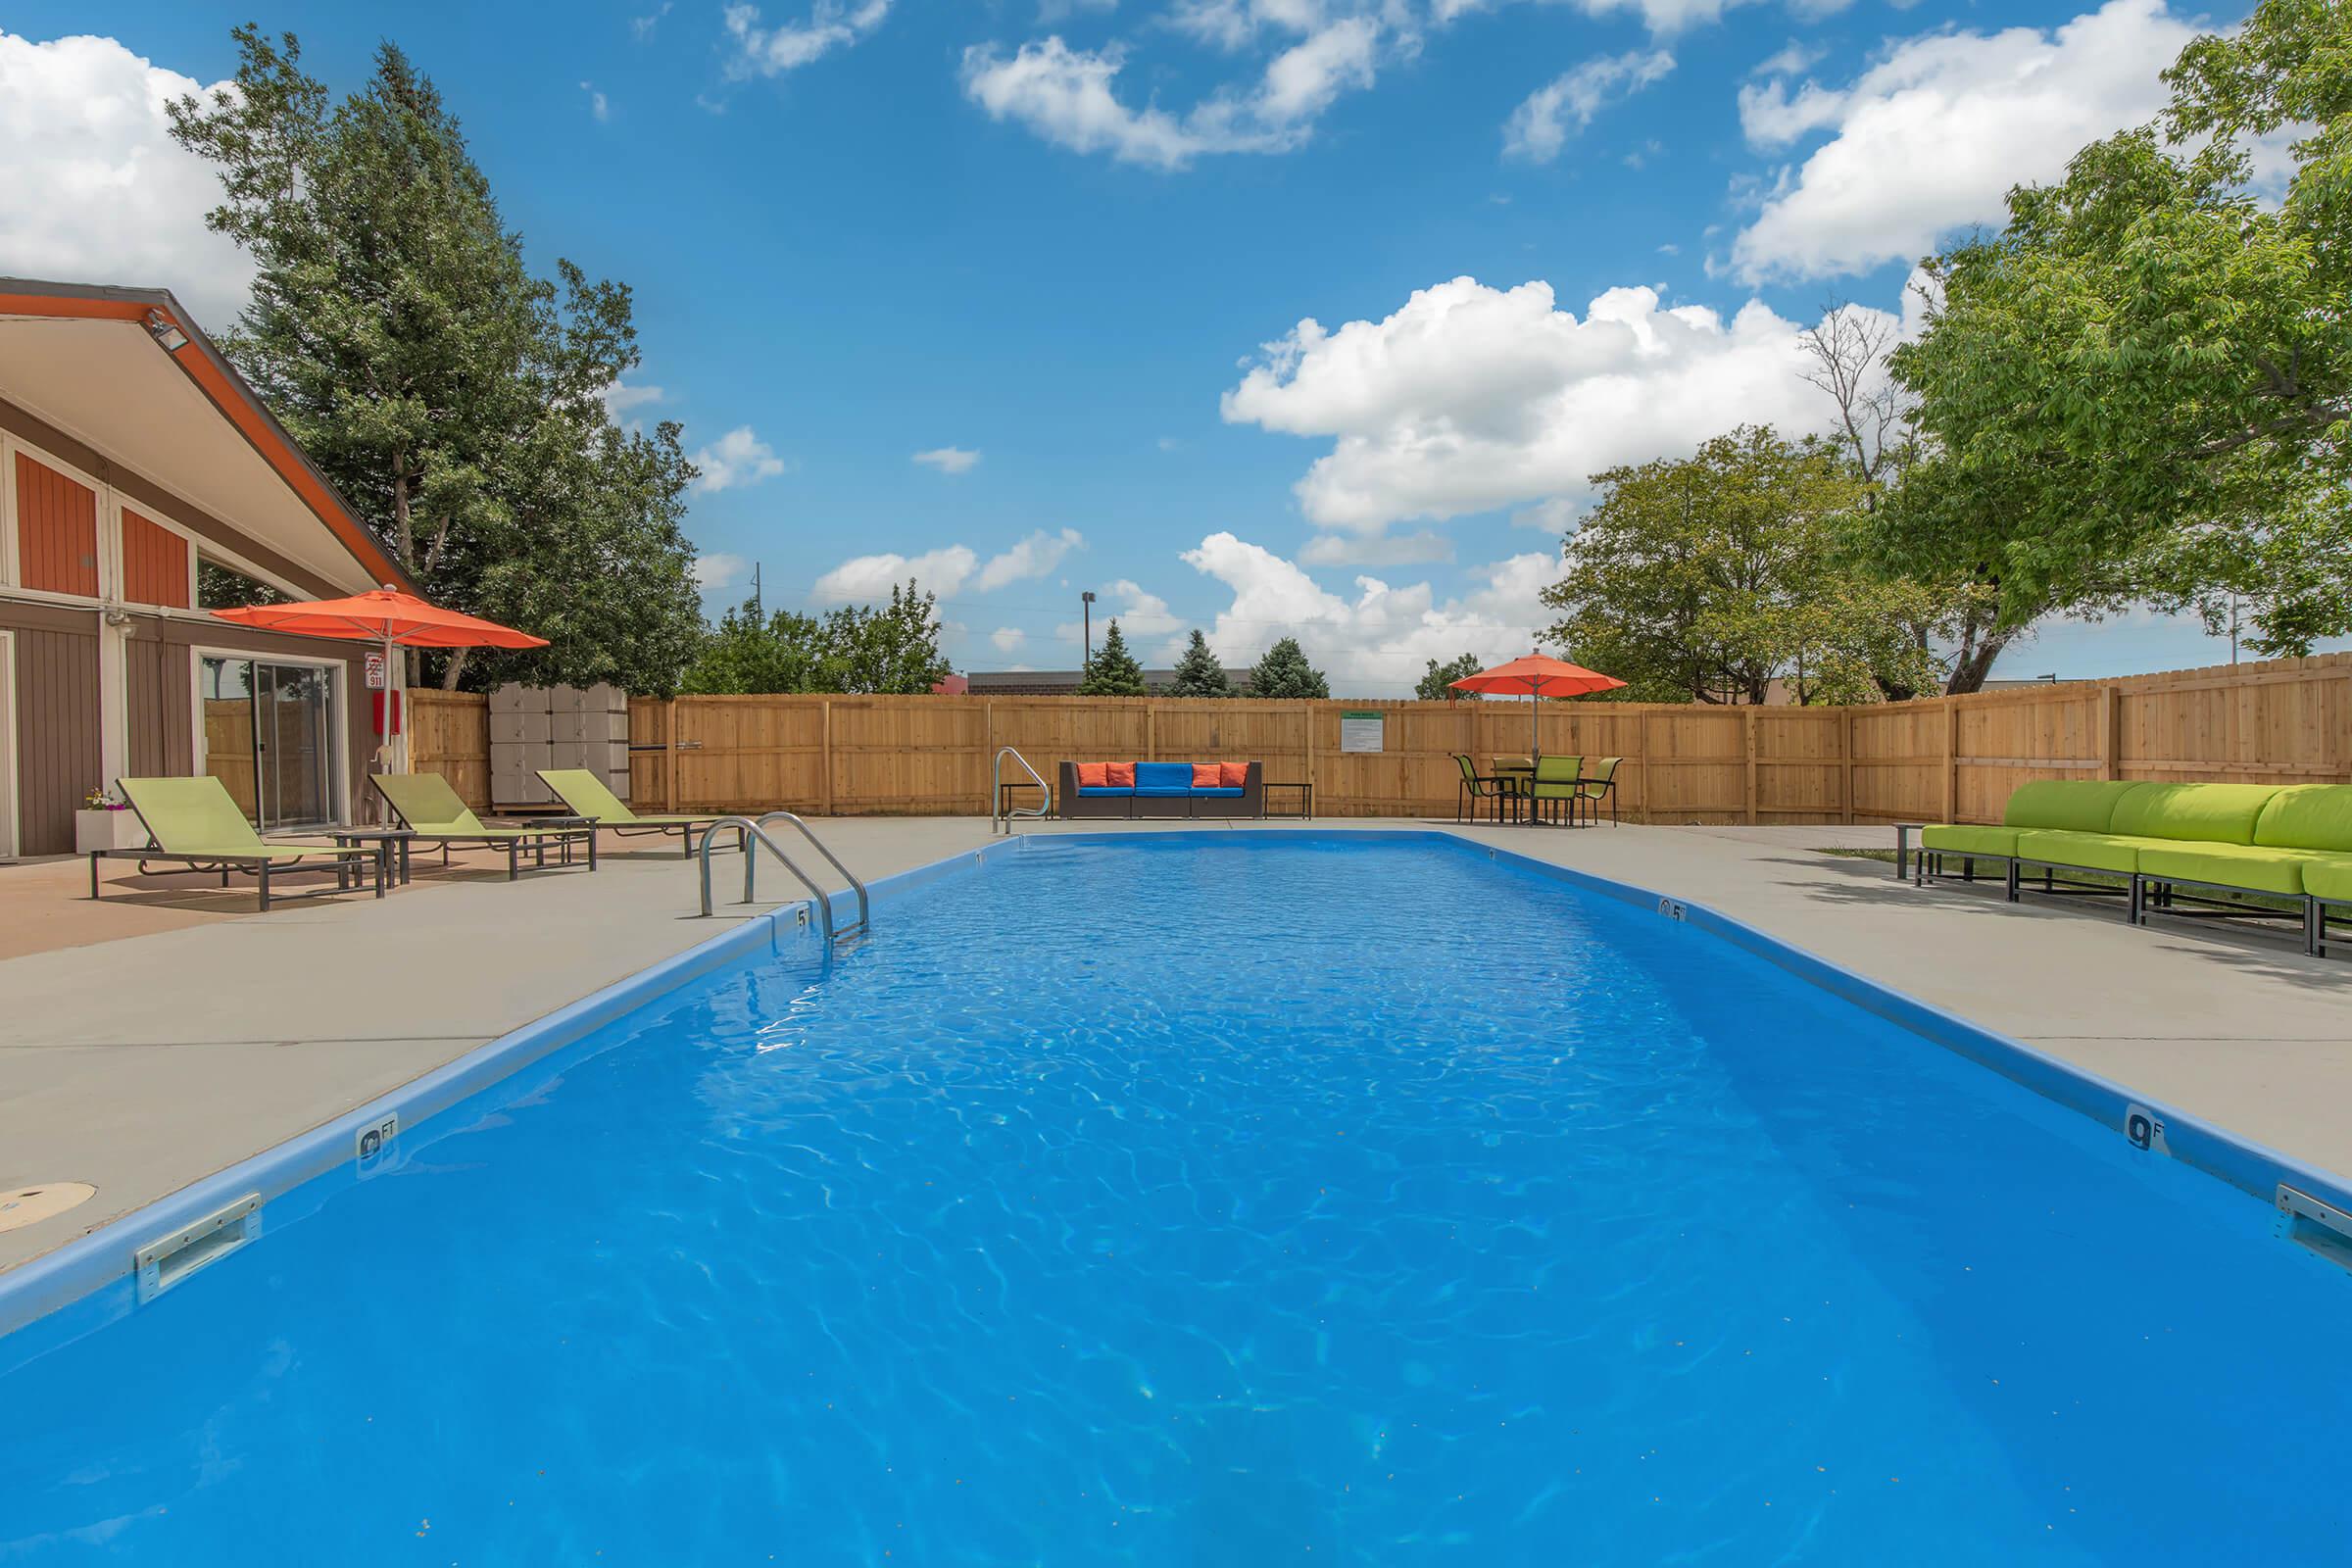 Swimming pool with lounge chairs and unbrellas at The Oslo, located in Northglenn, CO 2